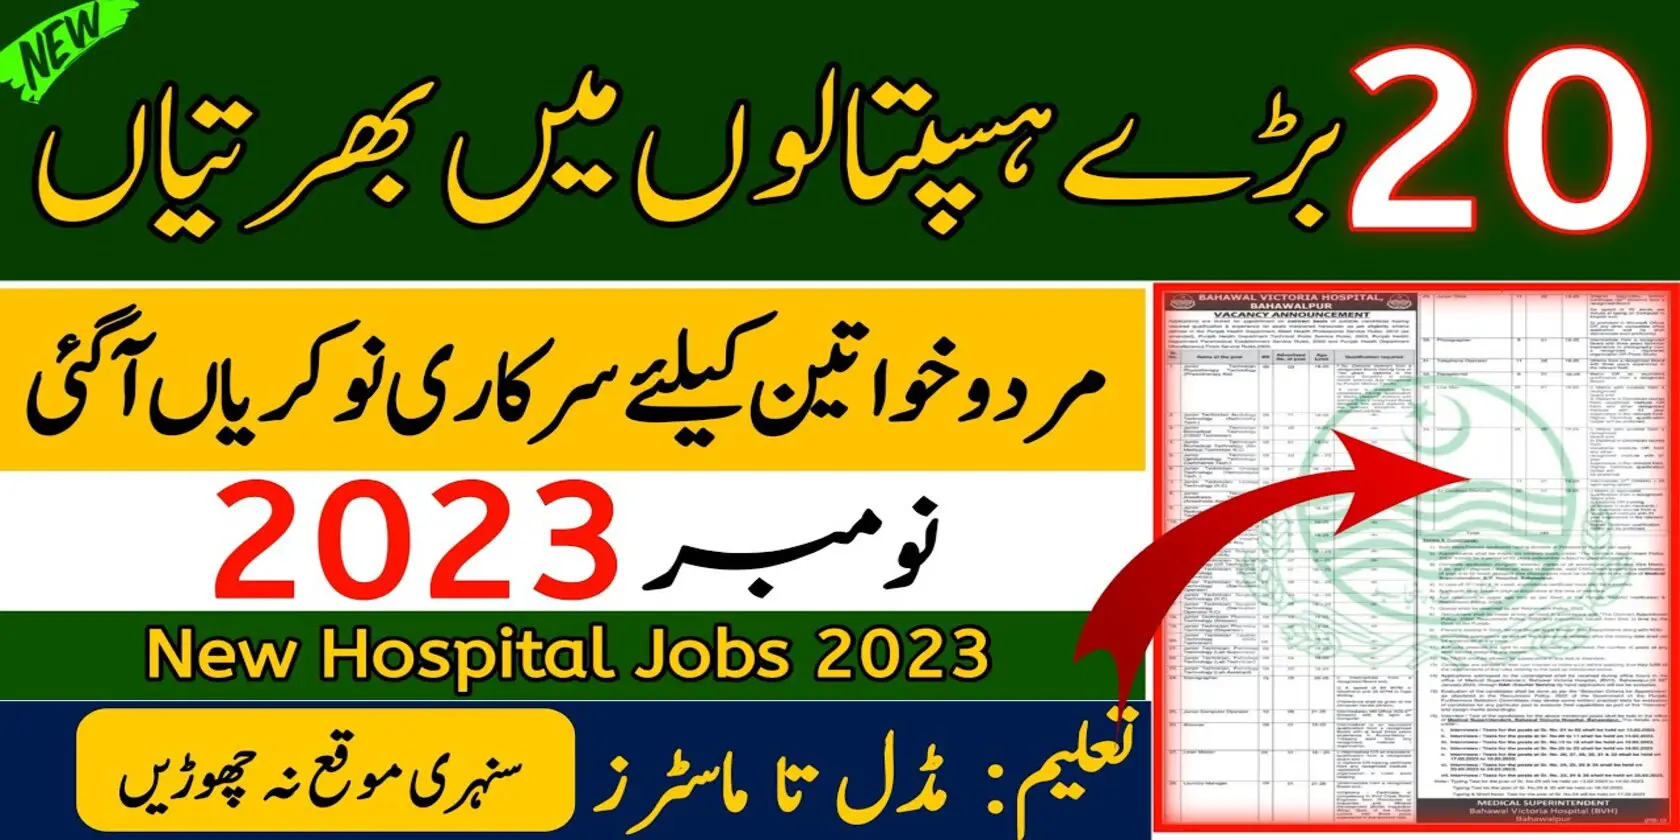 Hospital Jobs For Males And Females Apply Online.webp